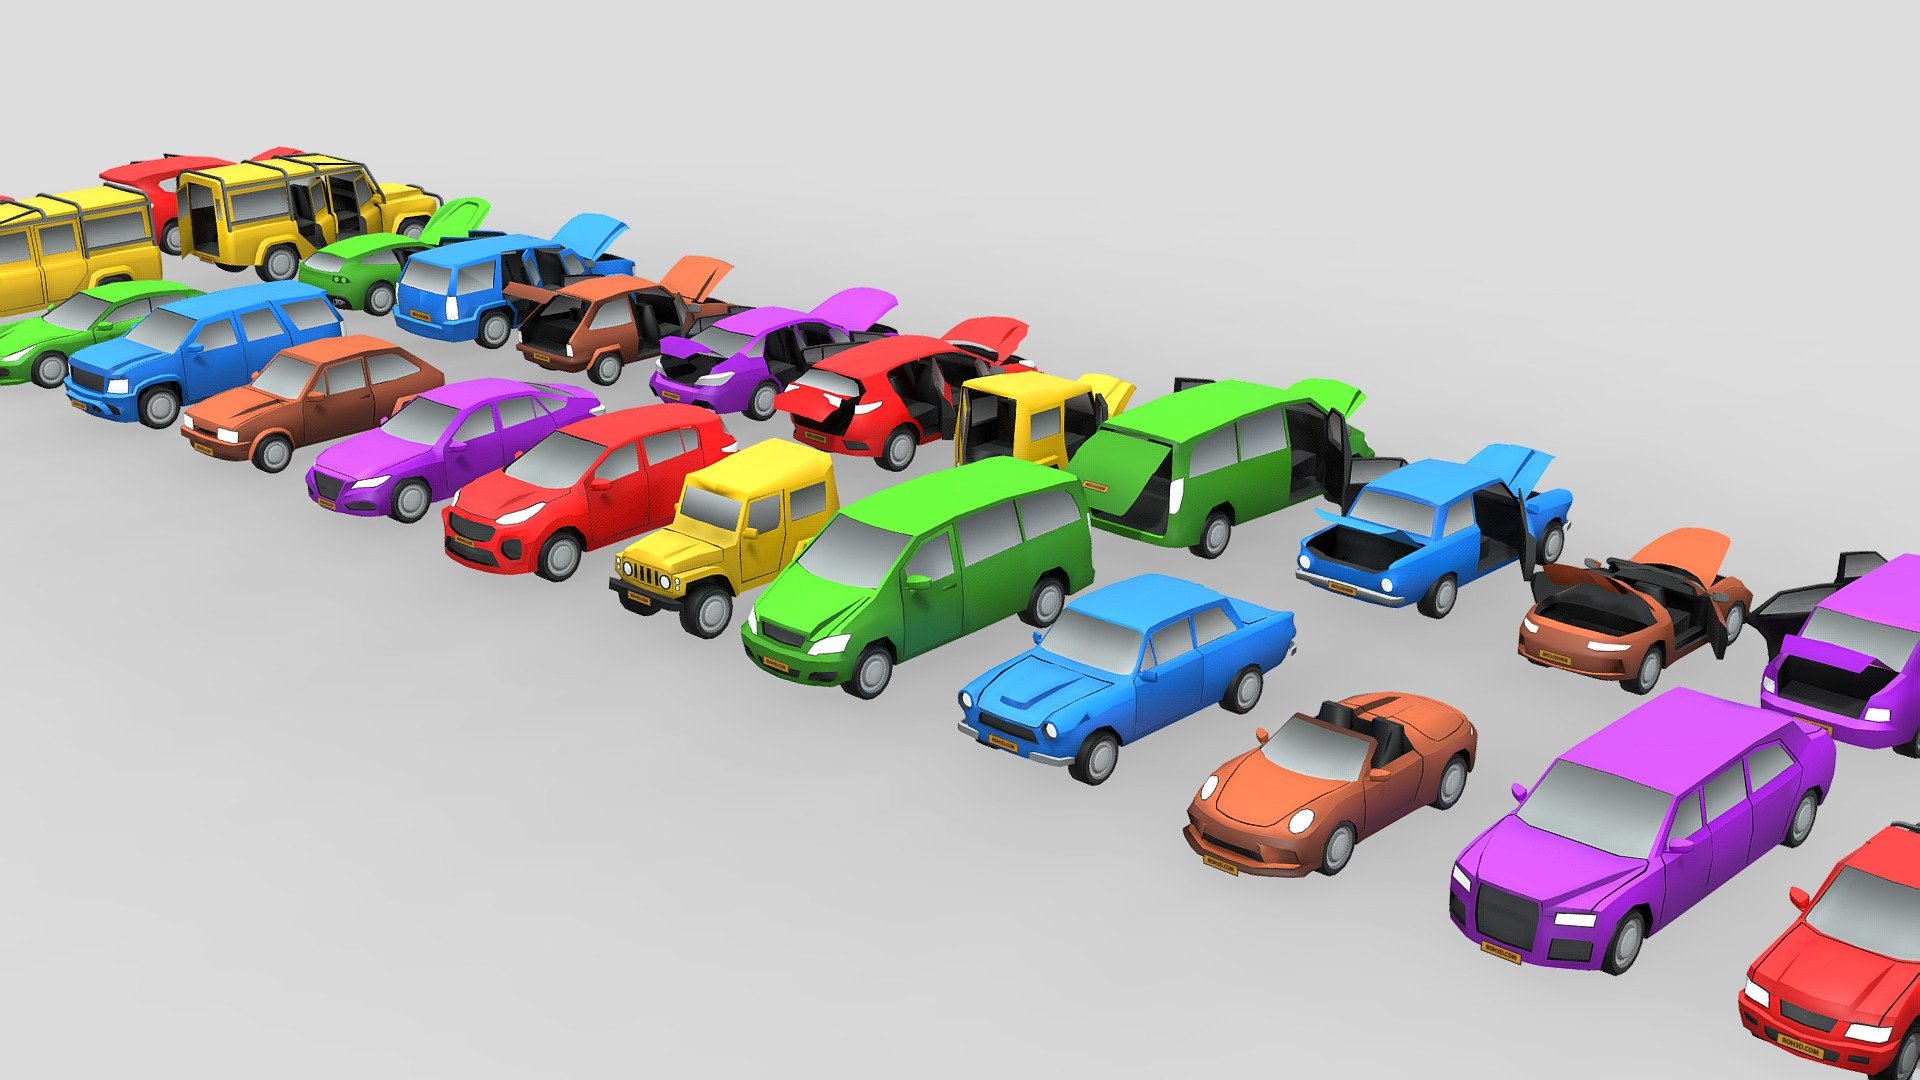 These great low poly assets come in stunning colors, make it look great even for close up render. With clean geometry, great topology, it makes these assets are suitable for any purpose. 

These cool cars even have doors and trunks that can be opened and closed! imagine what you can save by buying this asset pack.
Tt an affordable price, you are not only get 3d models, but also endless possibilities creation 3d model